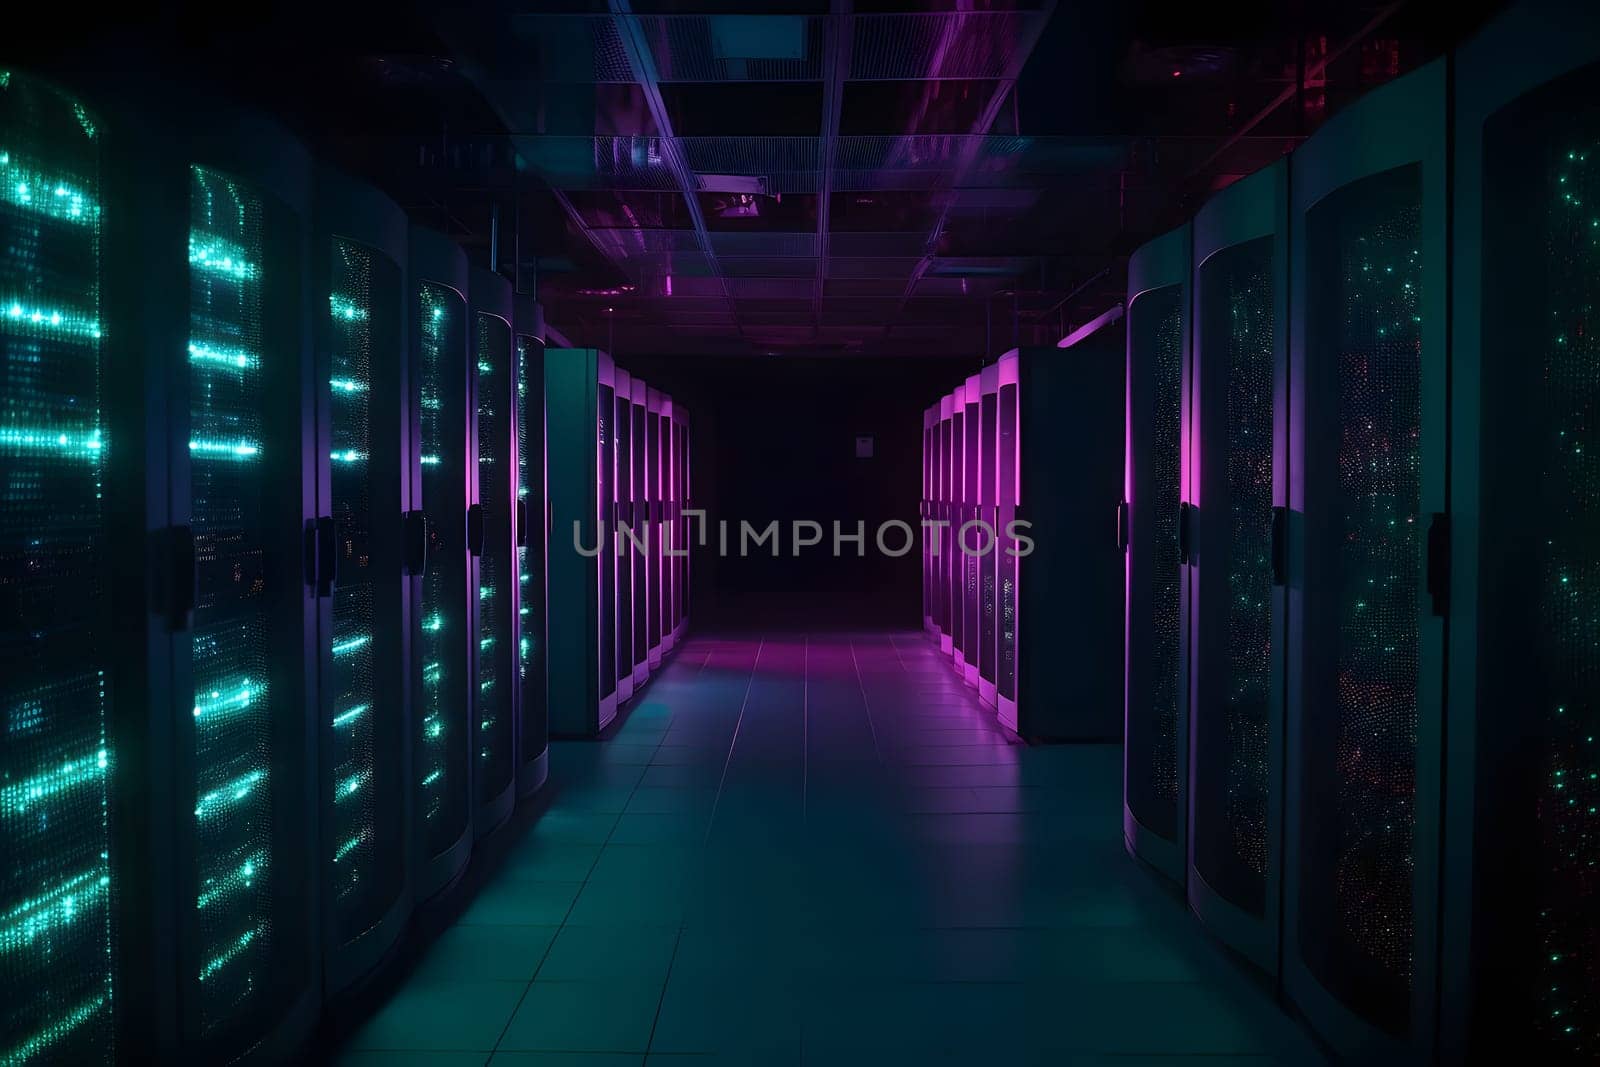 data center with multiple rows of fully operational servers in cyan-purple colors. Neural network generated in May 2023. Not based on any actual scene or pattern.